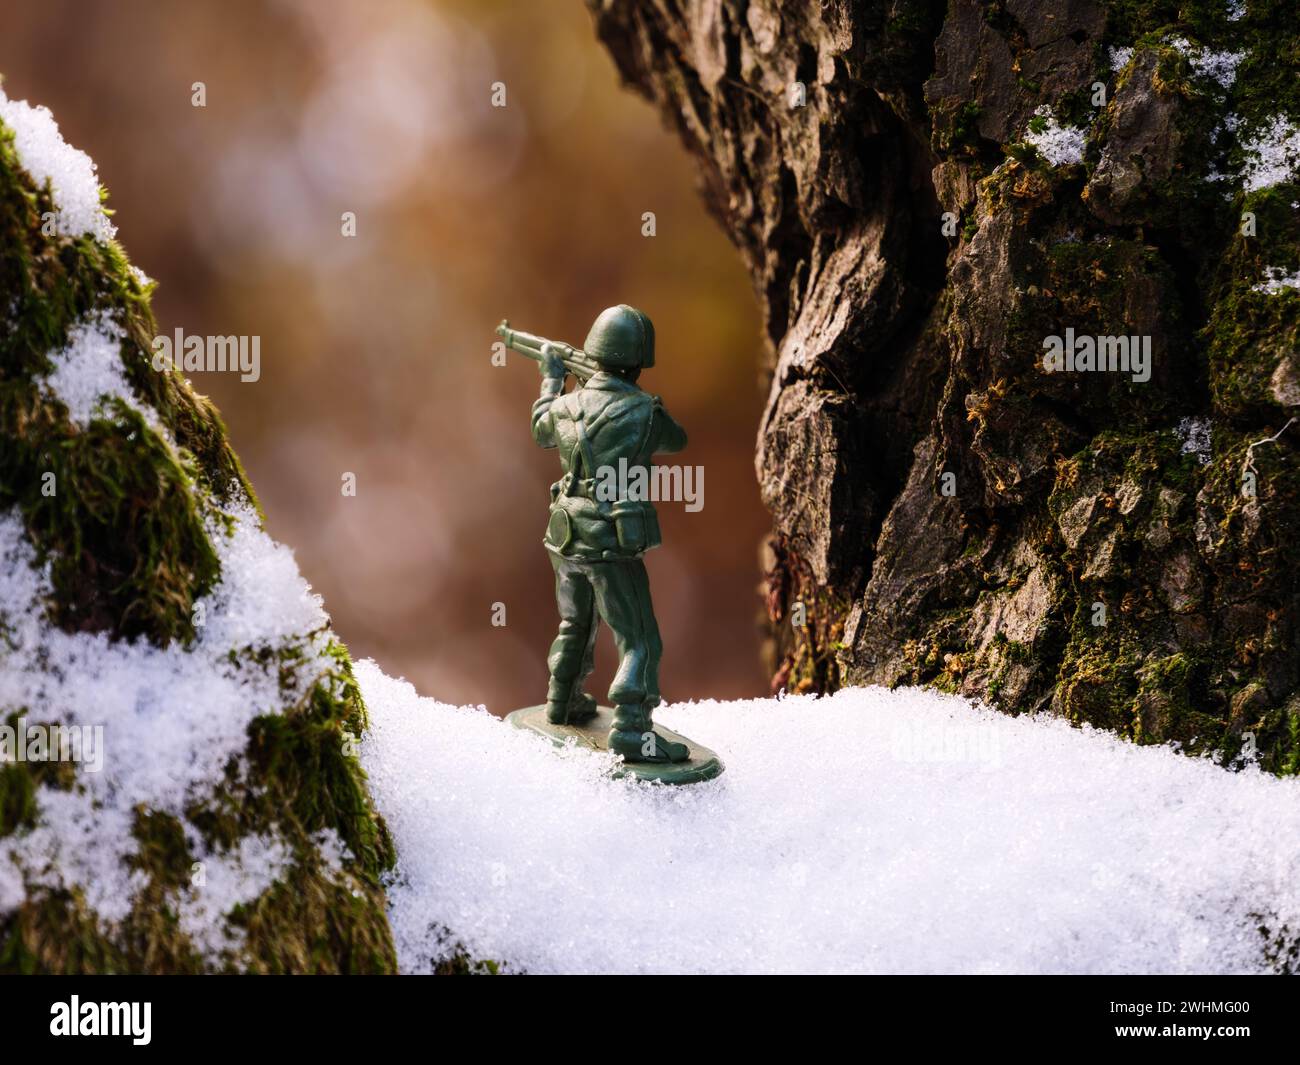 A toy soldier stands on a brown, green mossy, snowy tree branch in the frozen, cold, frosty winter weather. Stock Photo